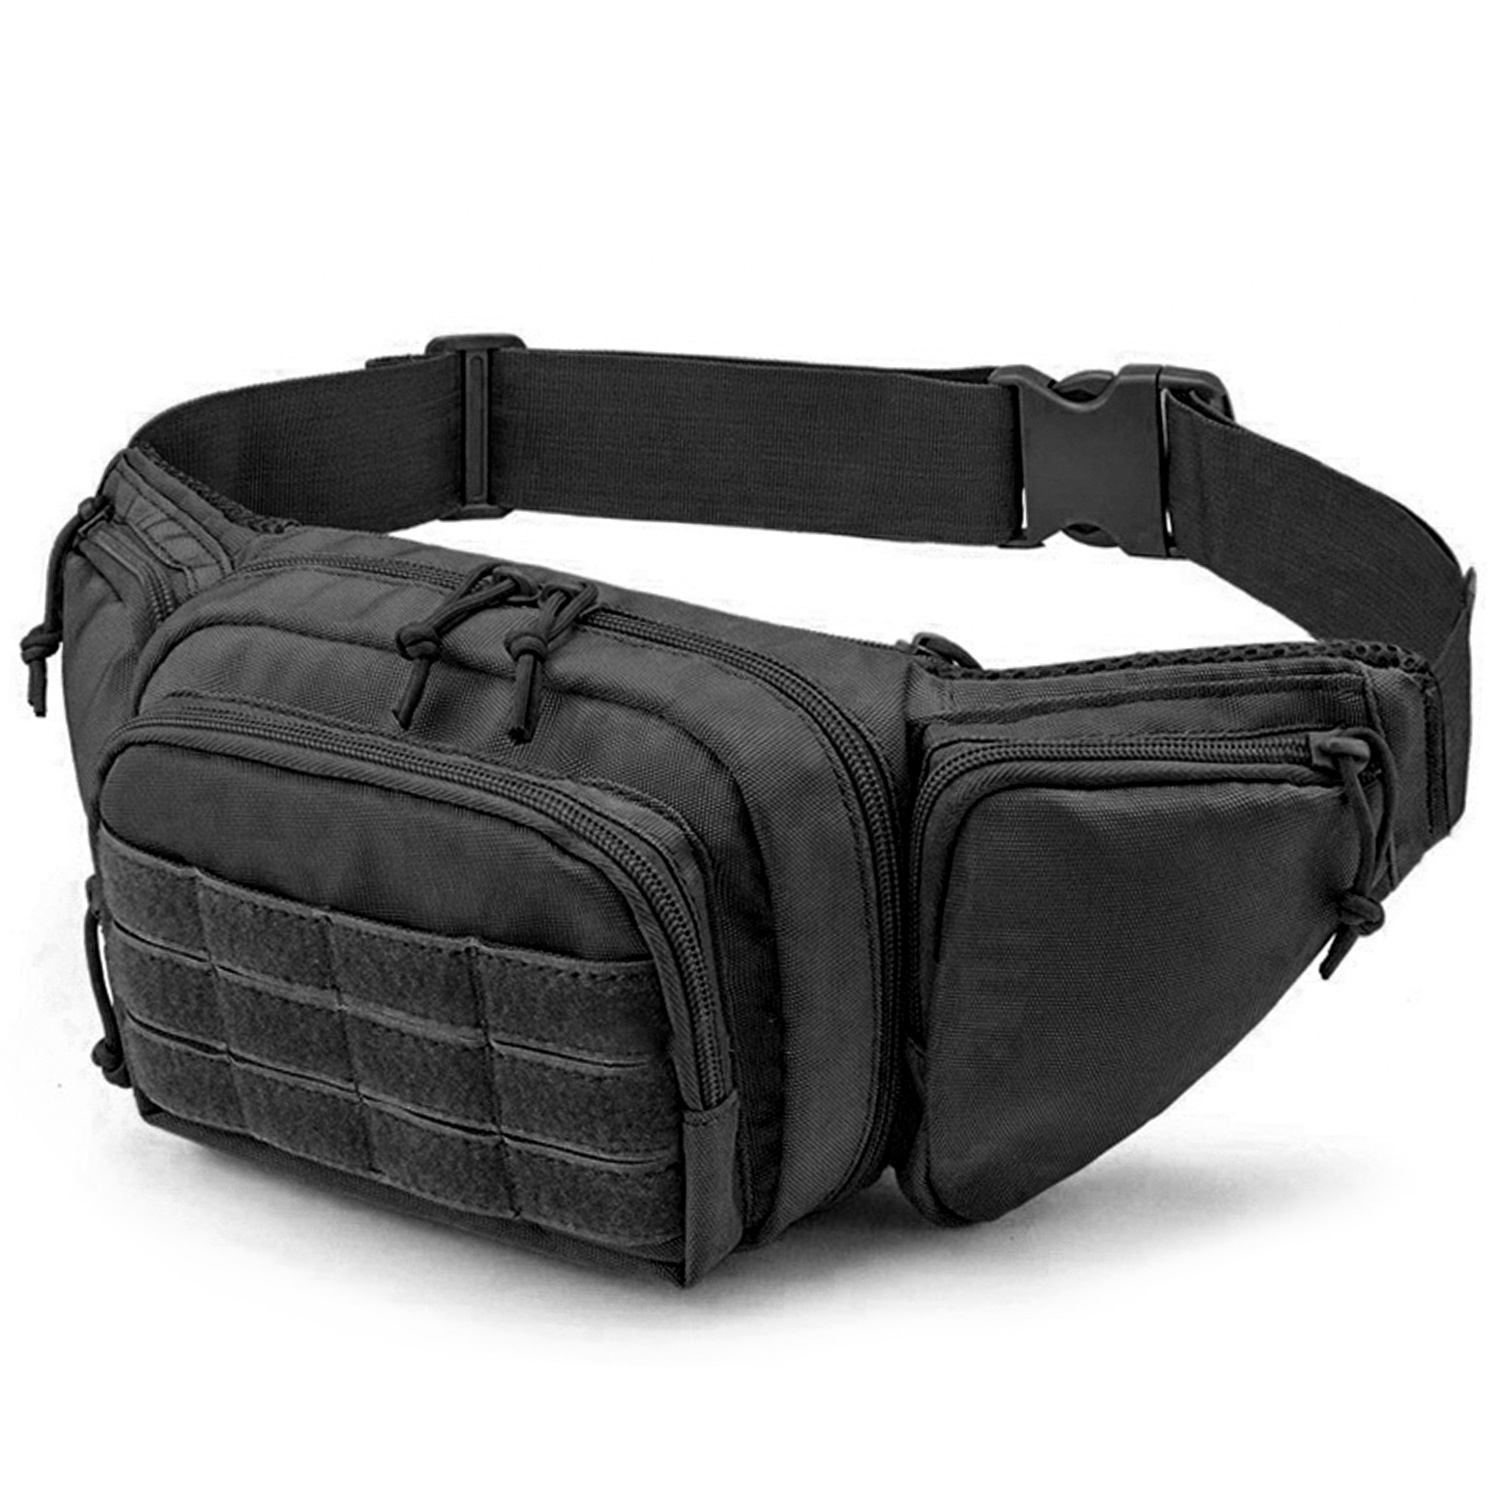 Wholesale Prices Satisfaction Guarantee Free Shipping Free Returns Explorer Tactical Quick